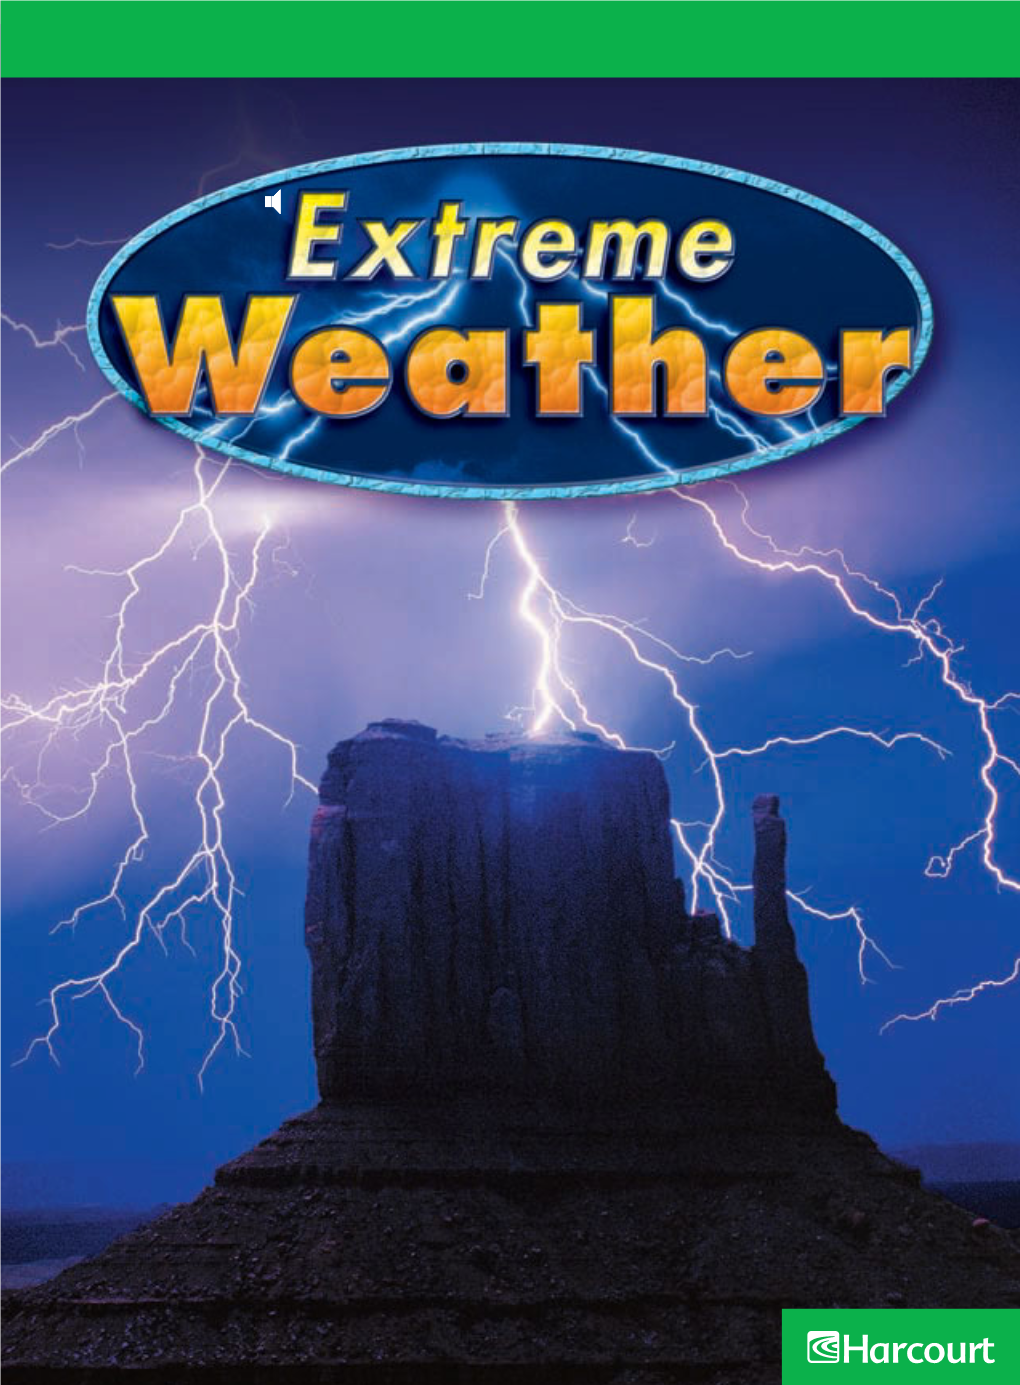 Extreme Weather That Sometimes Occurs on Our Planet